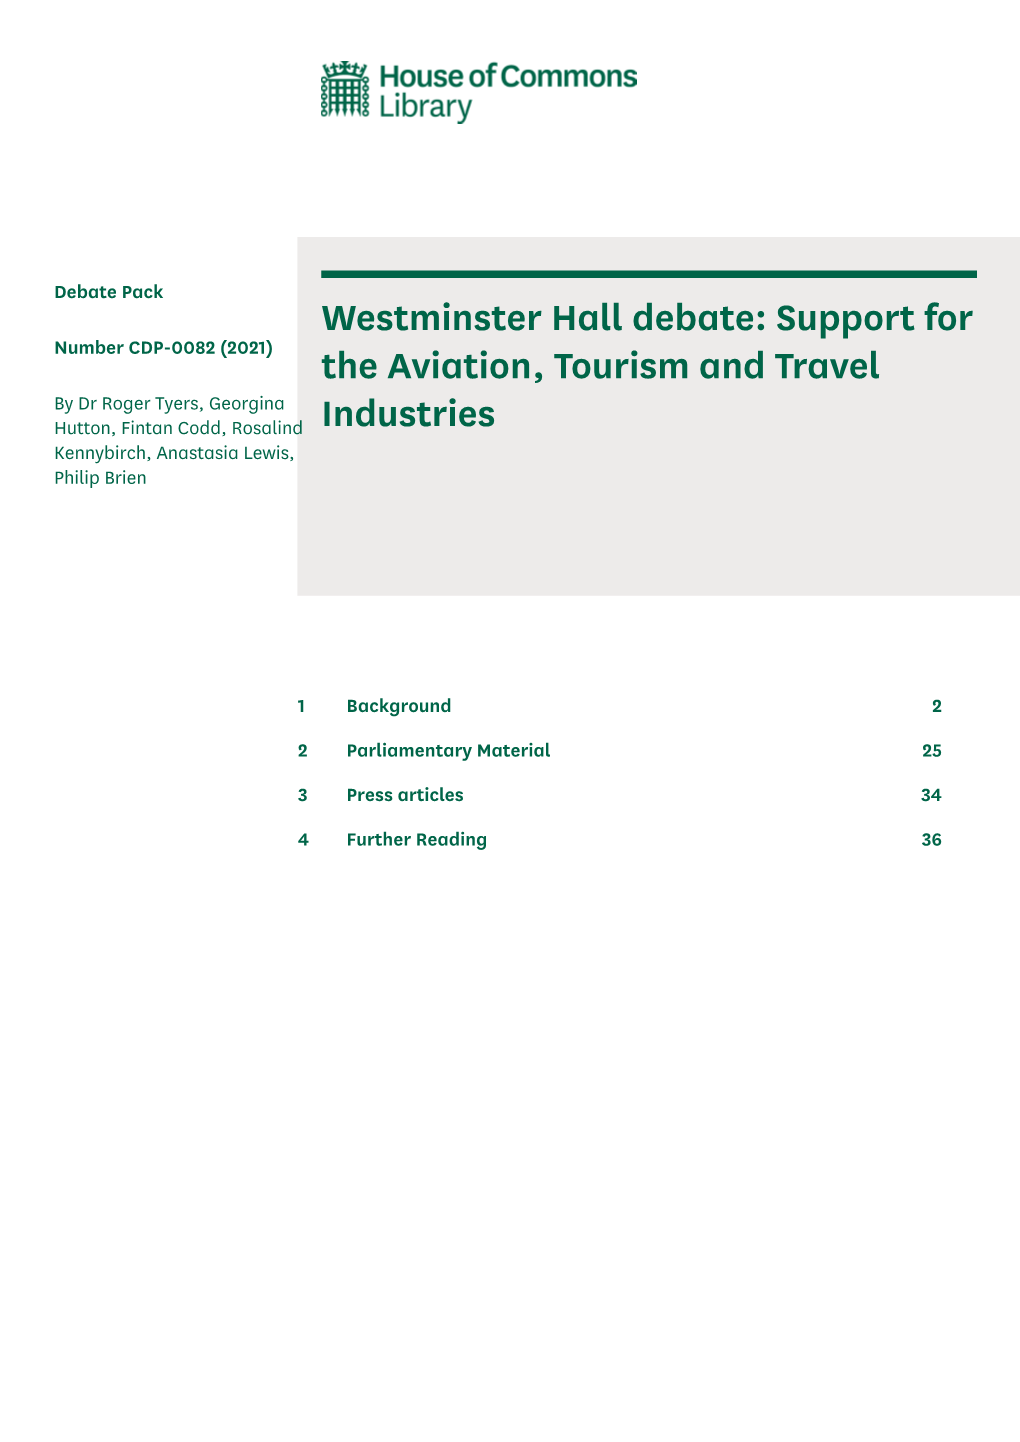 Support for the Aviation, Tourism and Travel Industries